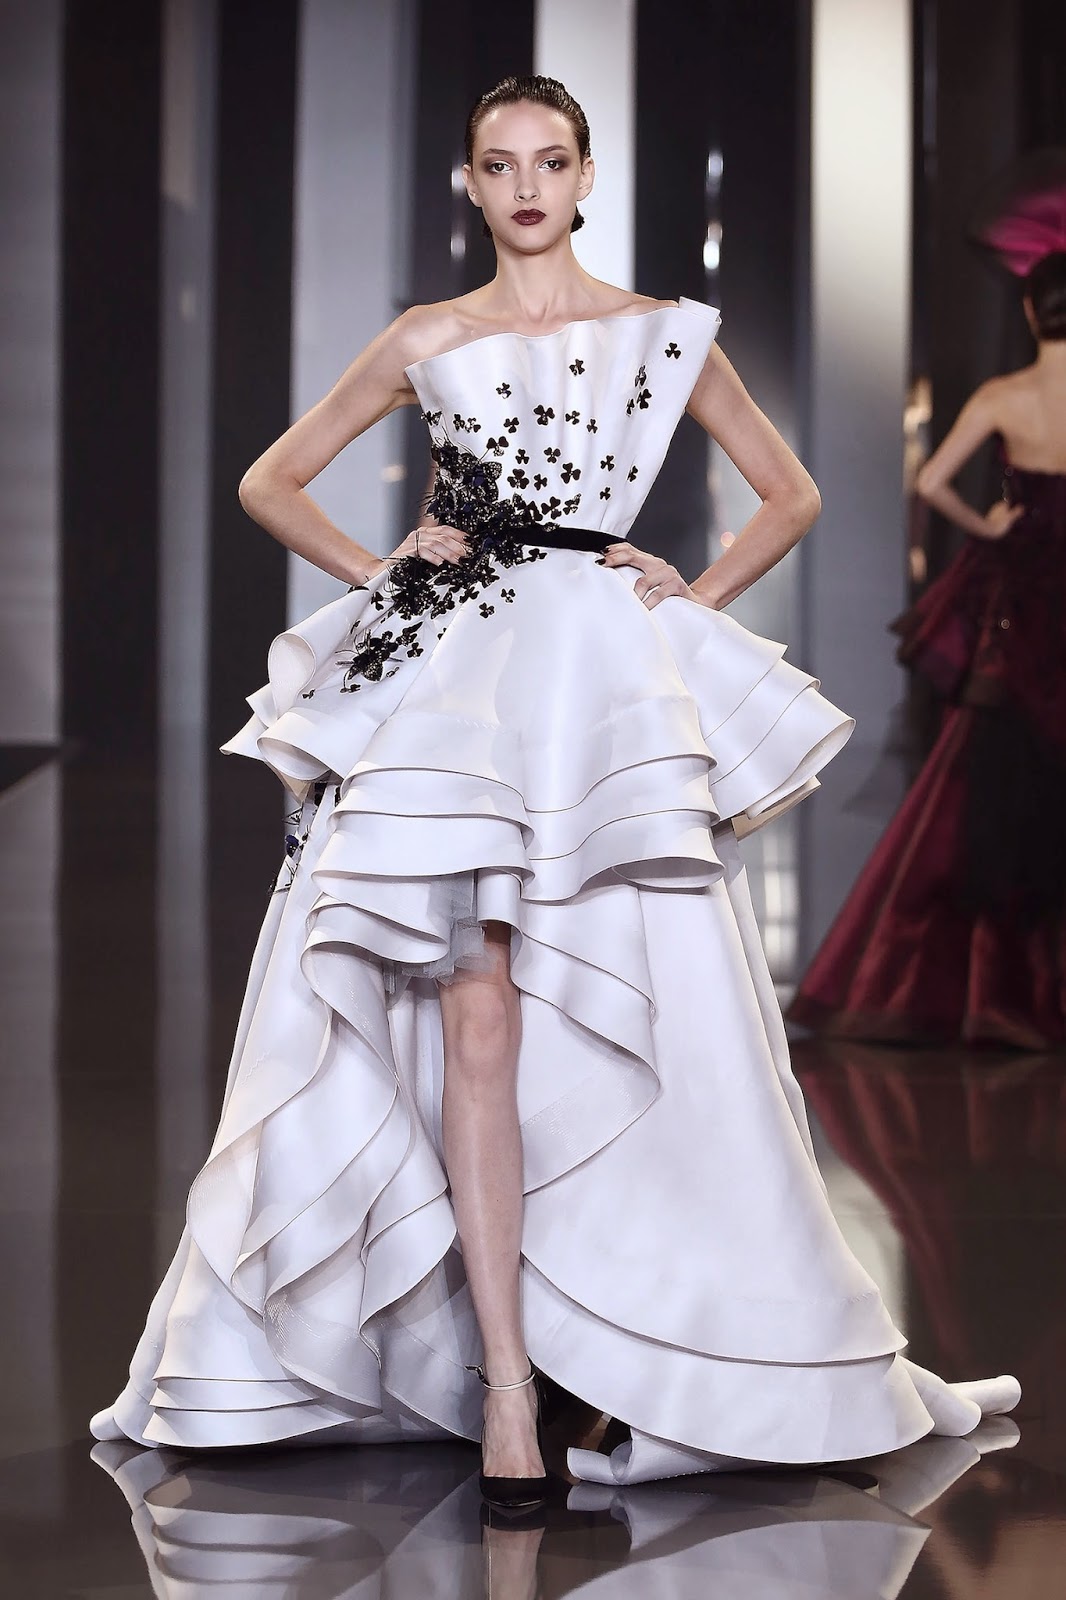 Couture collection. Ralph & Russo Couture 2021. Ralph Russo платья пышные. Зухаир Мурад 2020.